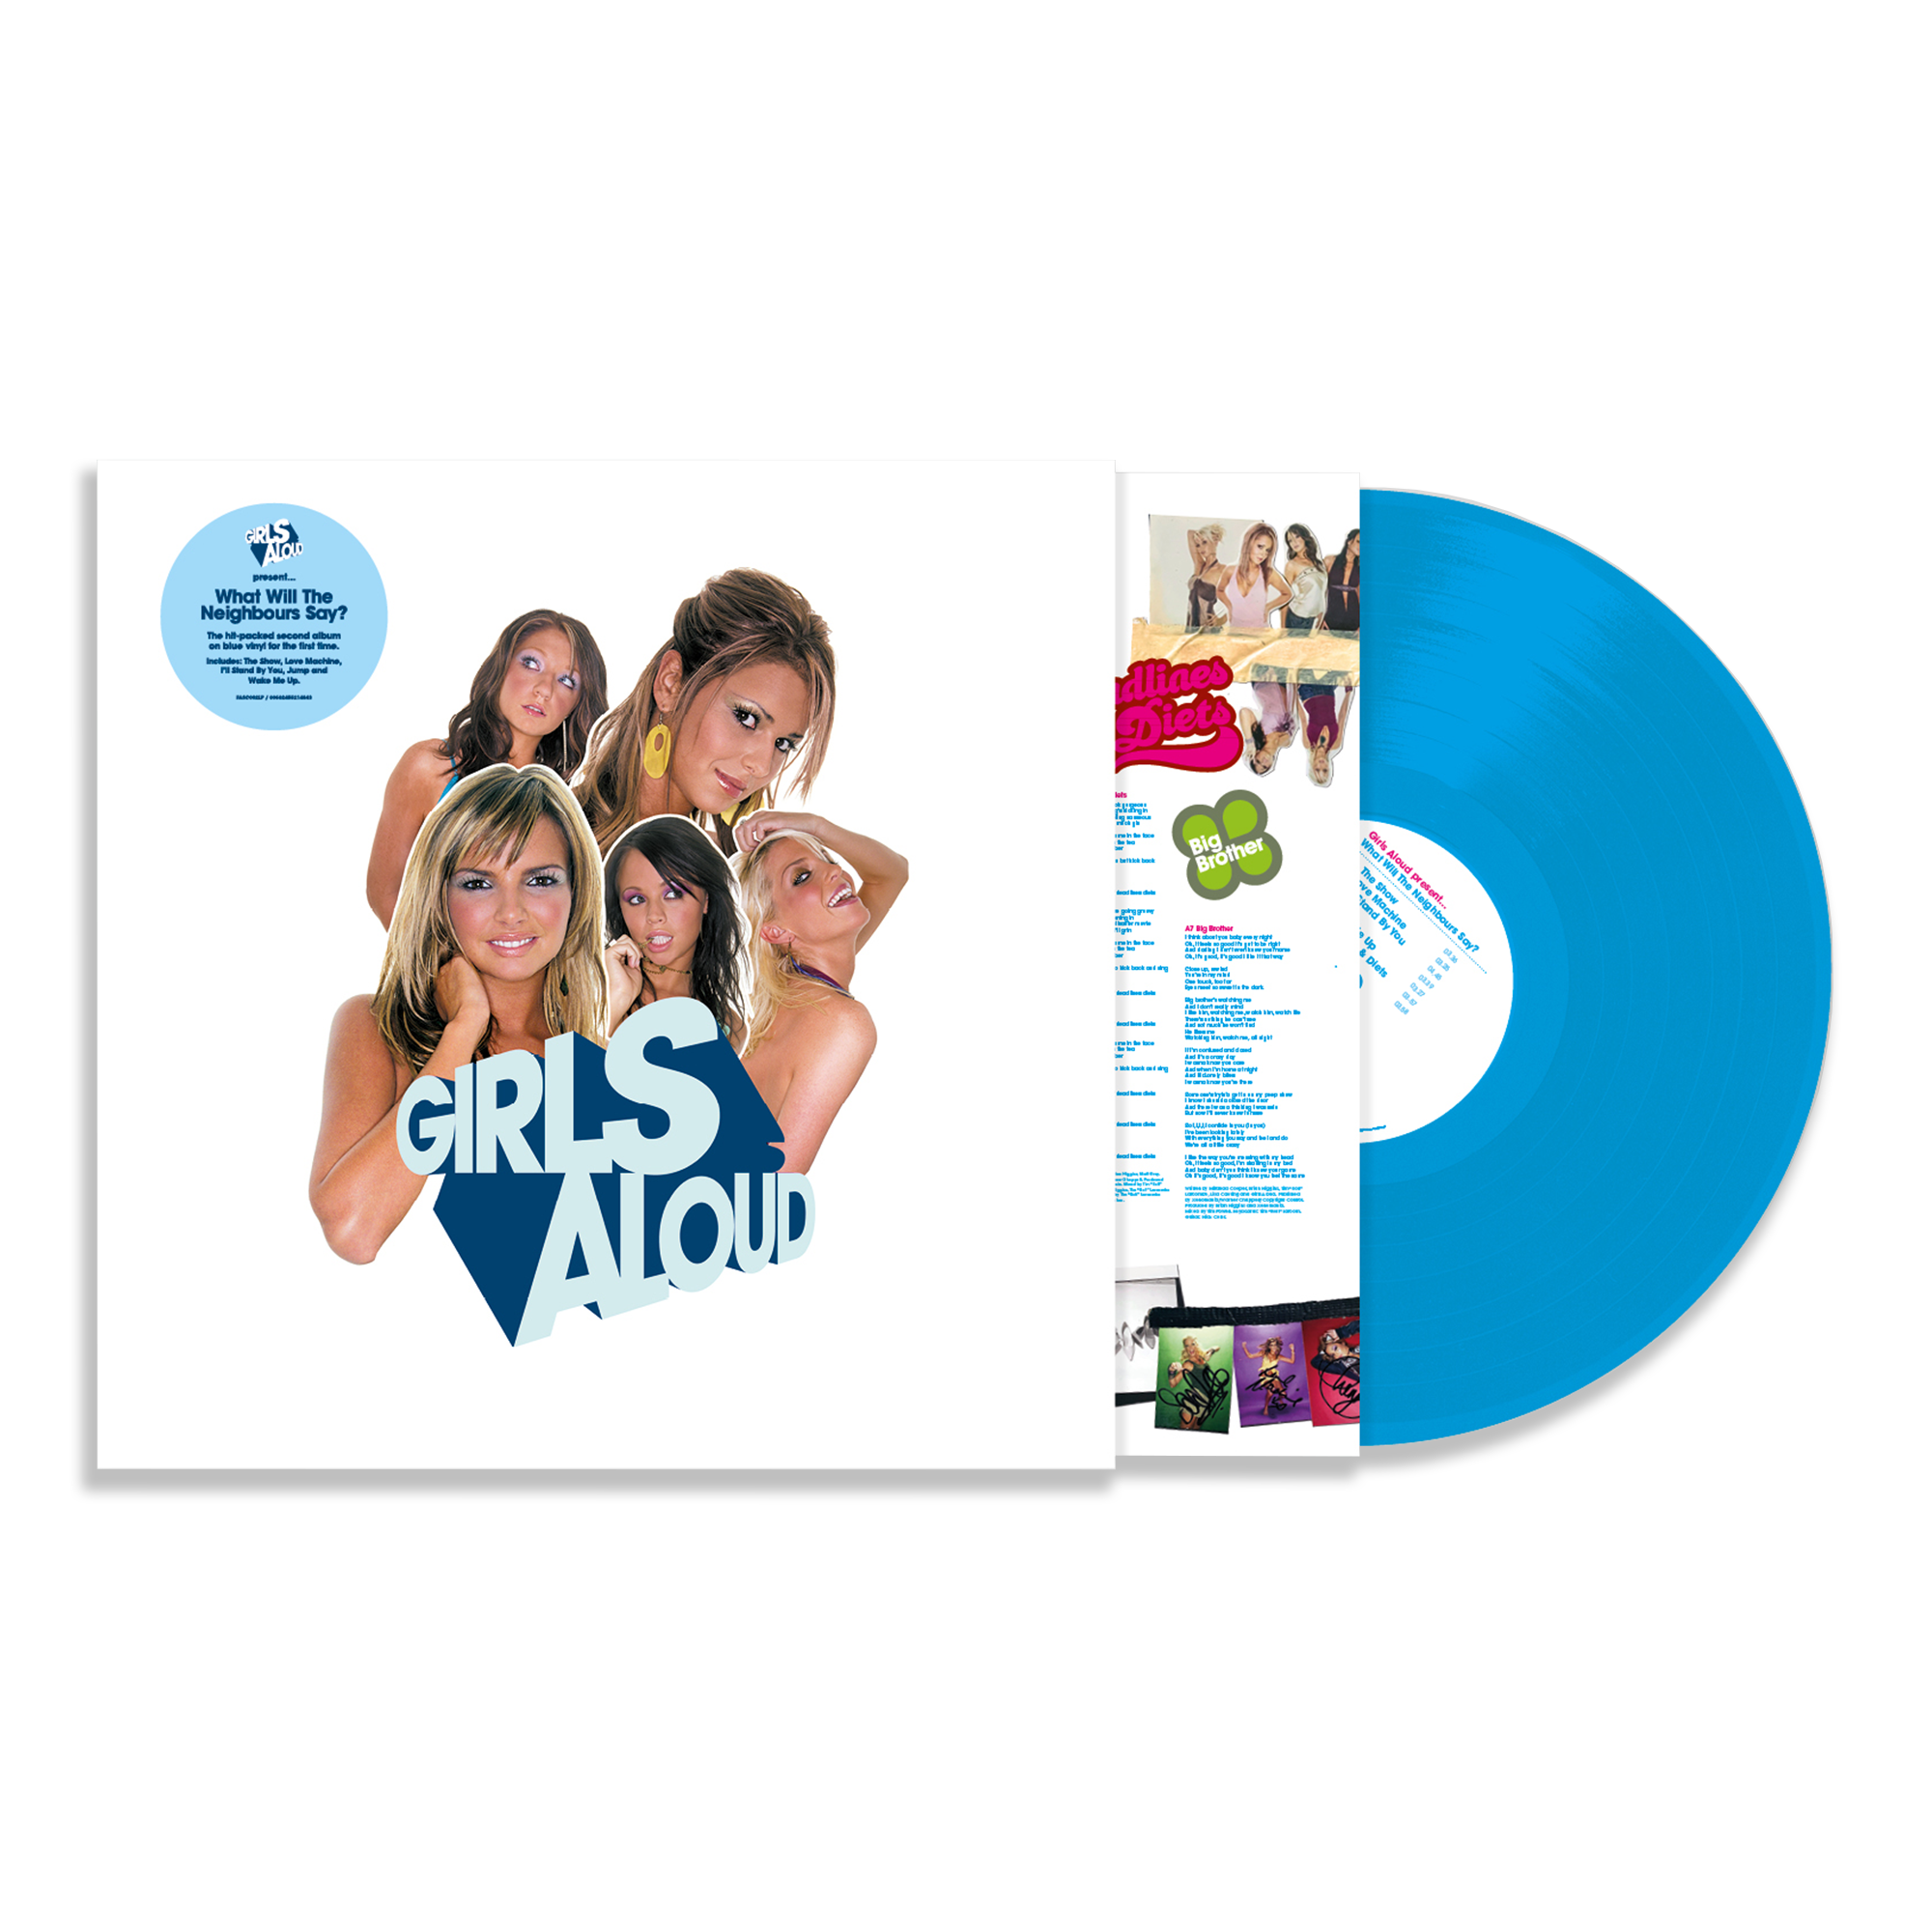 What Will The Neighbours Say? (Deluxe Edition): Sky Blue Vinyl LP & Sticker Sheet